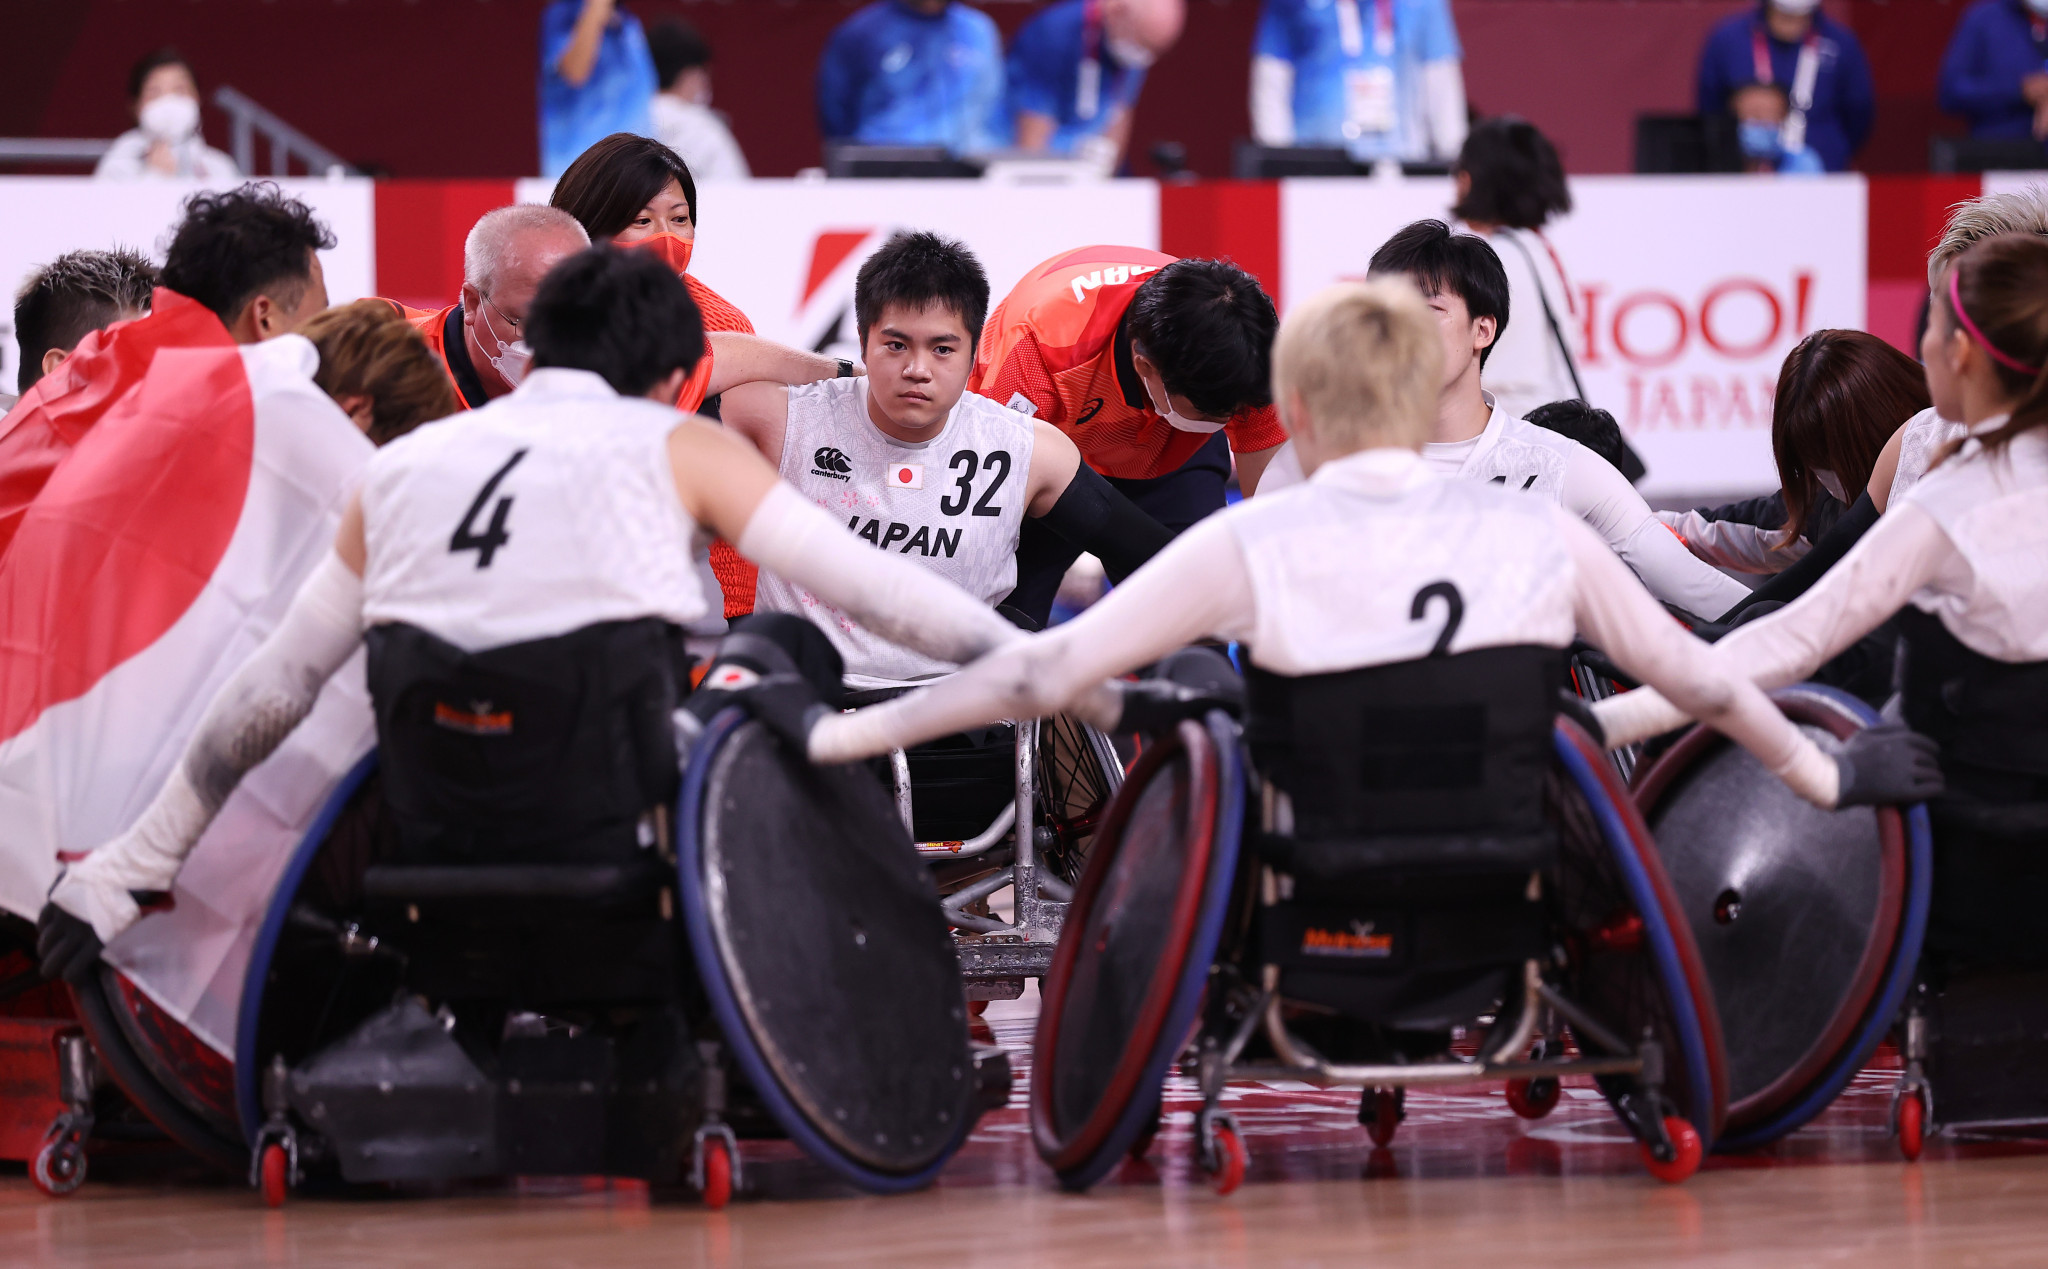 Japan won both their fixtures on the second day of the World Wheelchair Rugby Championship in Vejle ©Getty Images